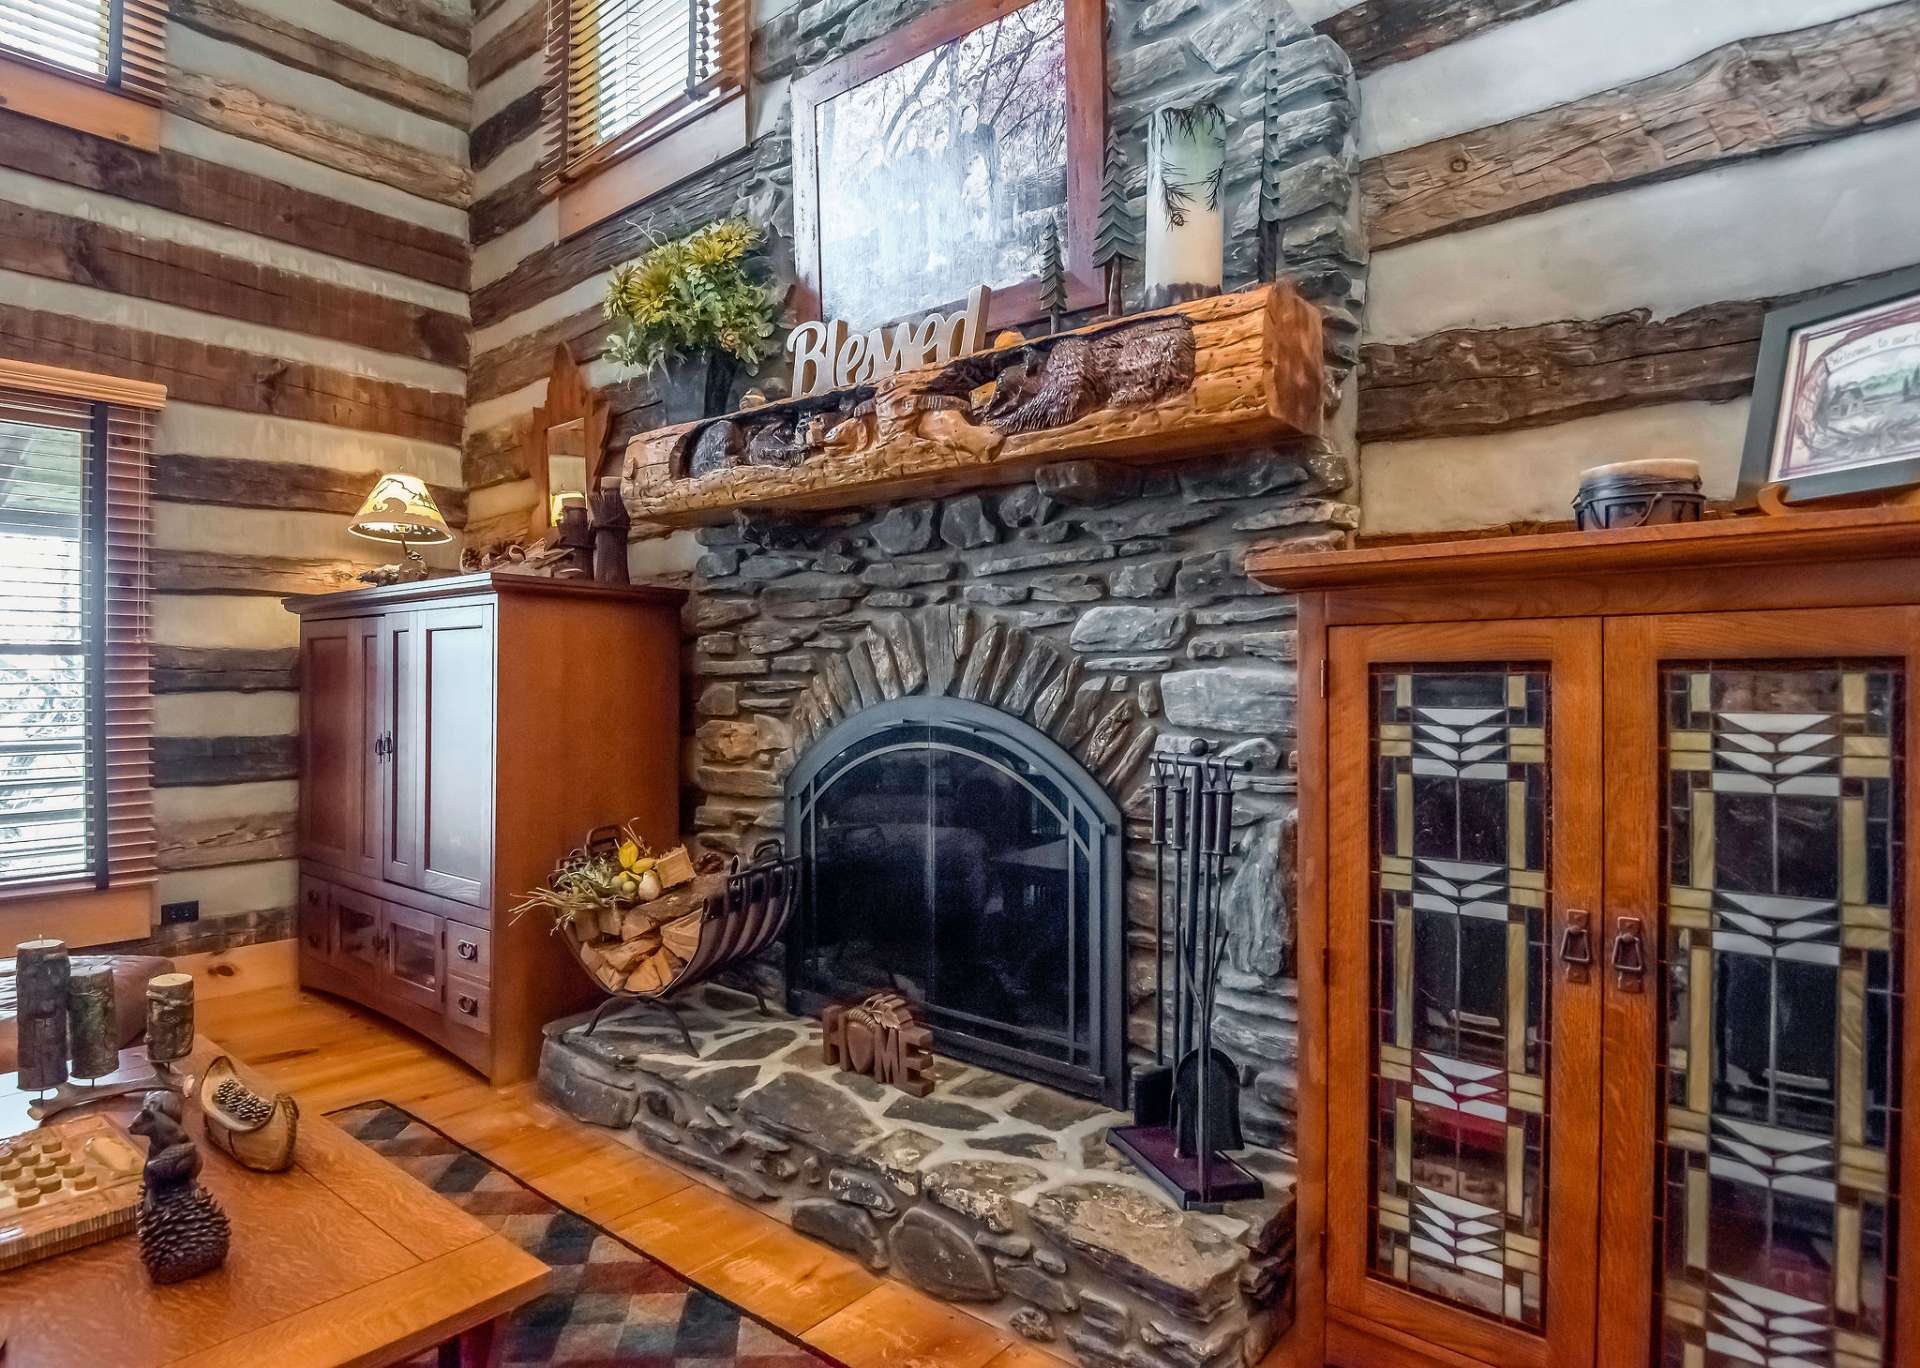 The craftsmanship of this stone fireplace and custom mantel are pieces of natural art to sit and admire.